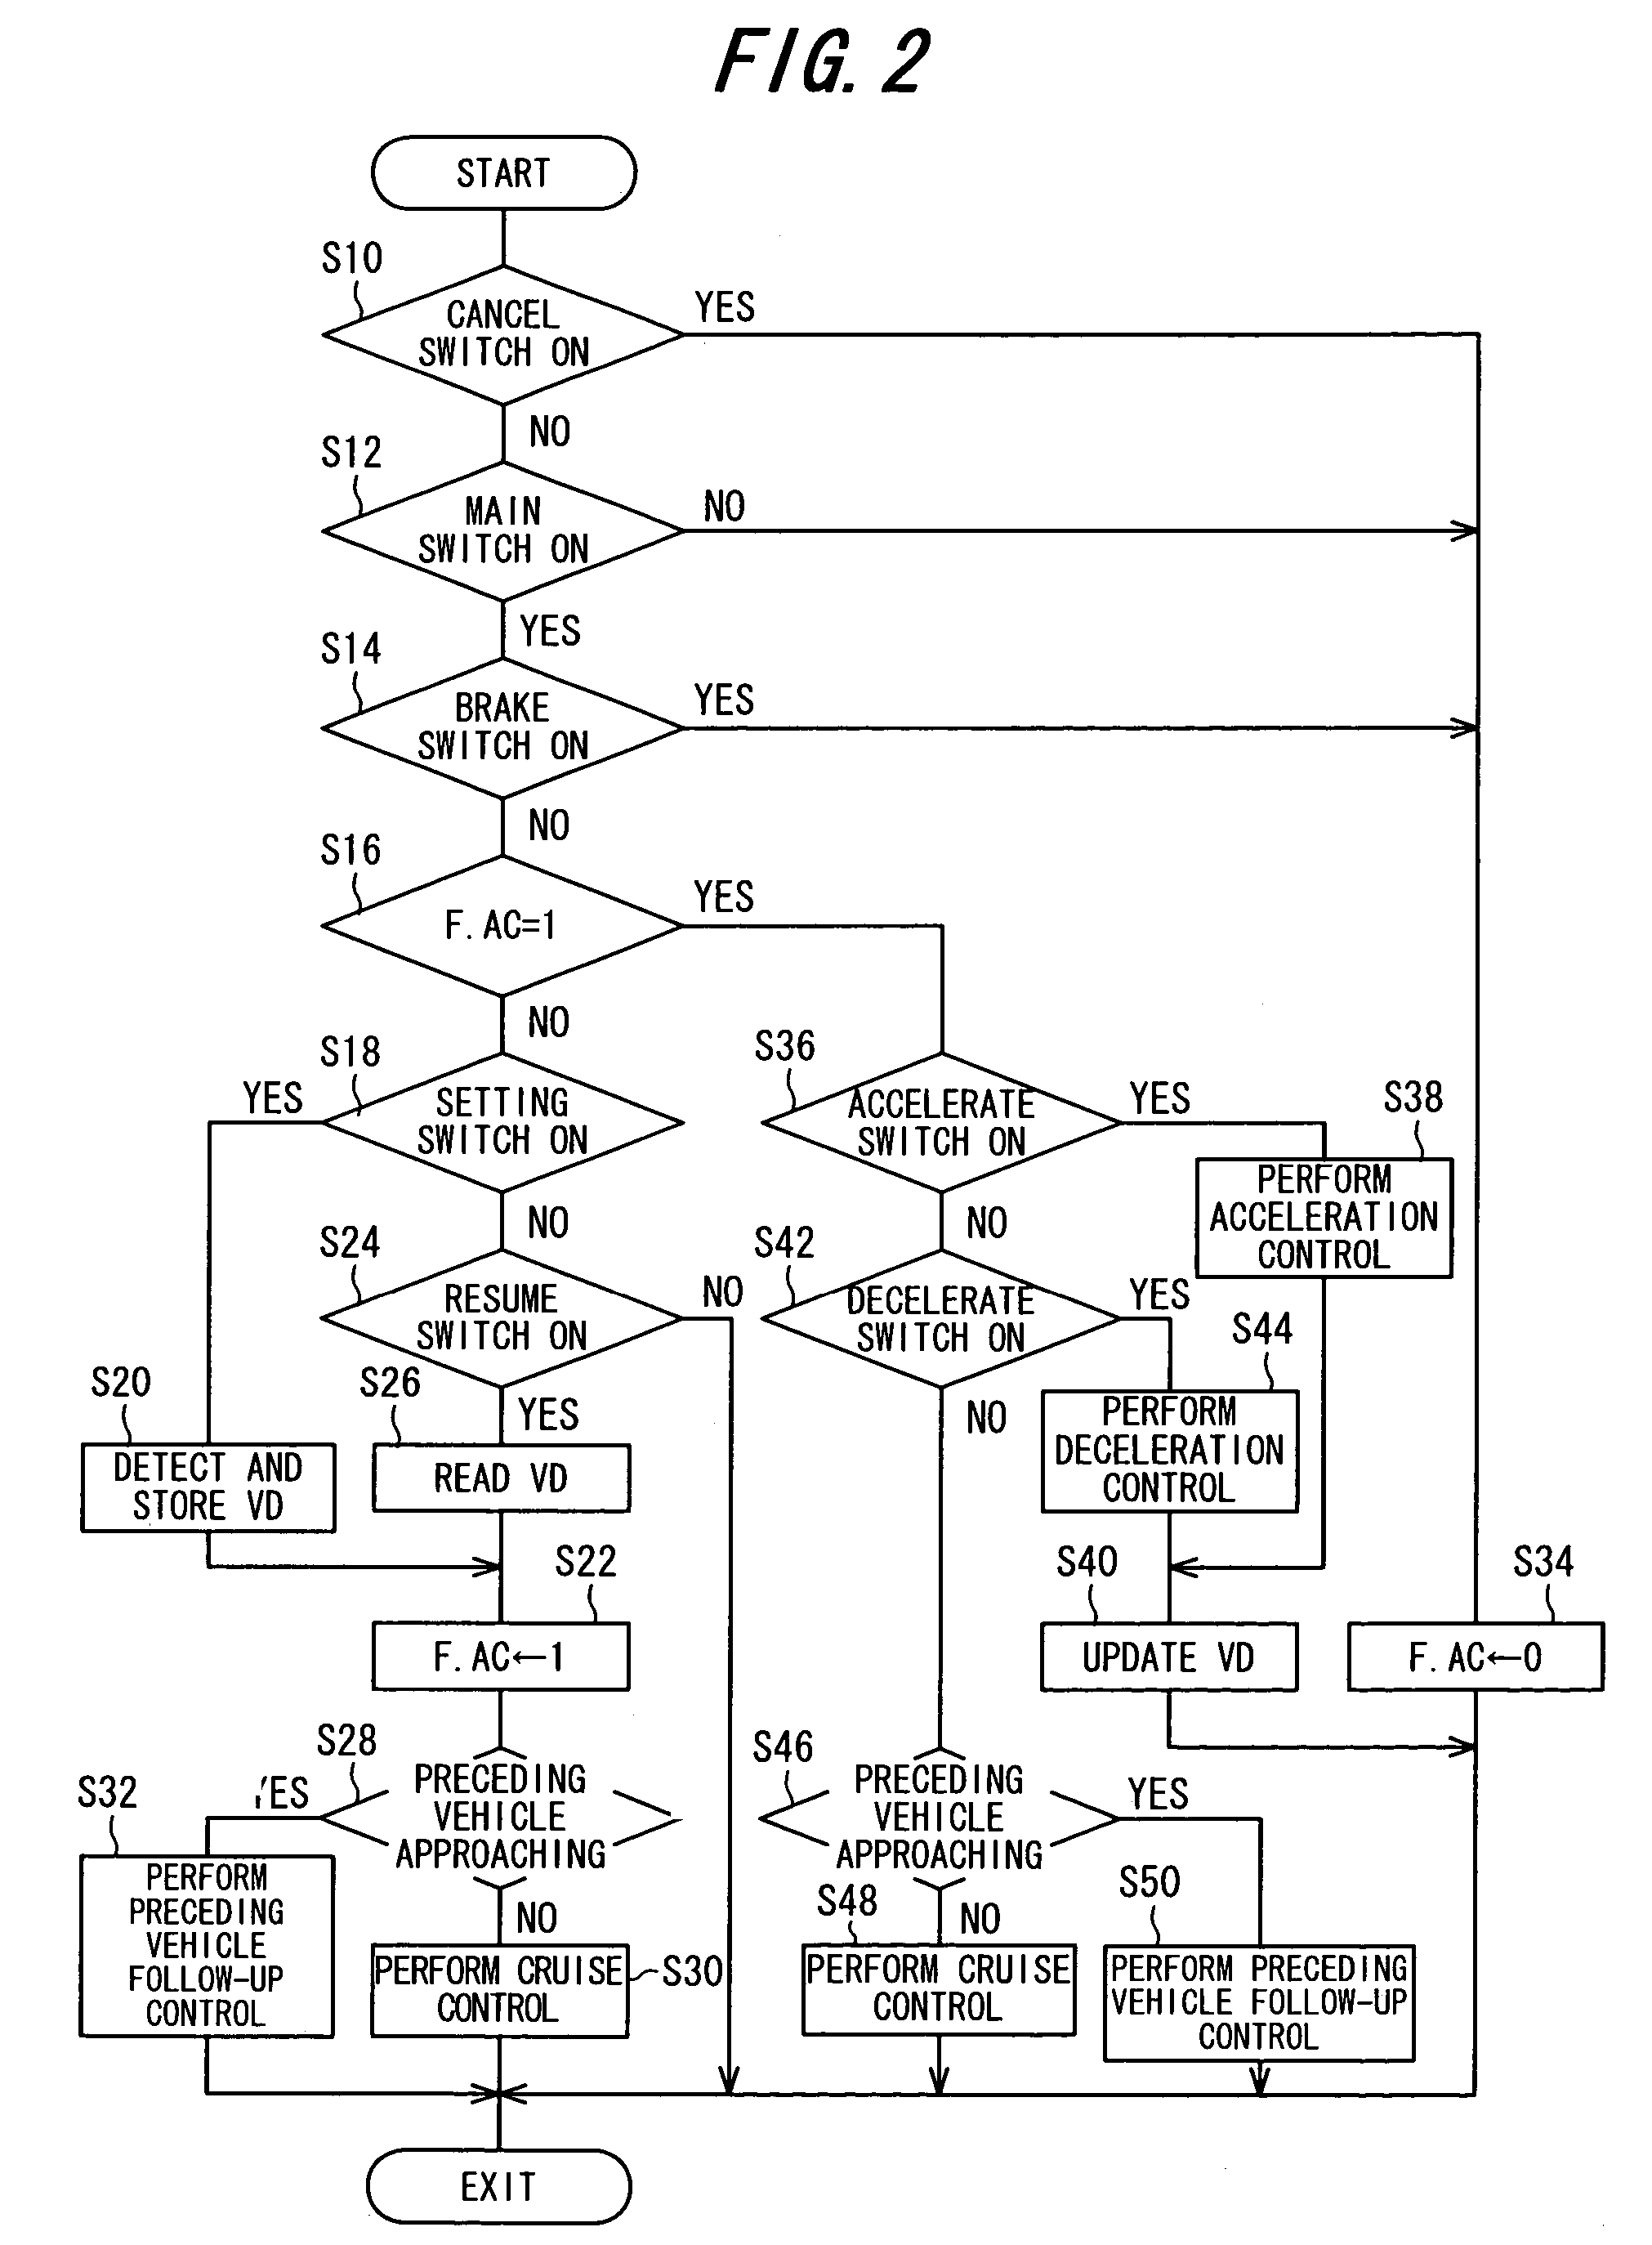 Control system for cylinder cut-off internal combustion engine